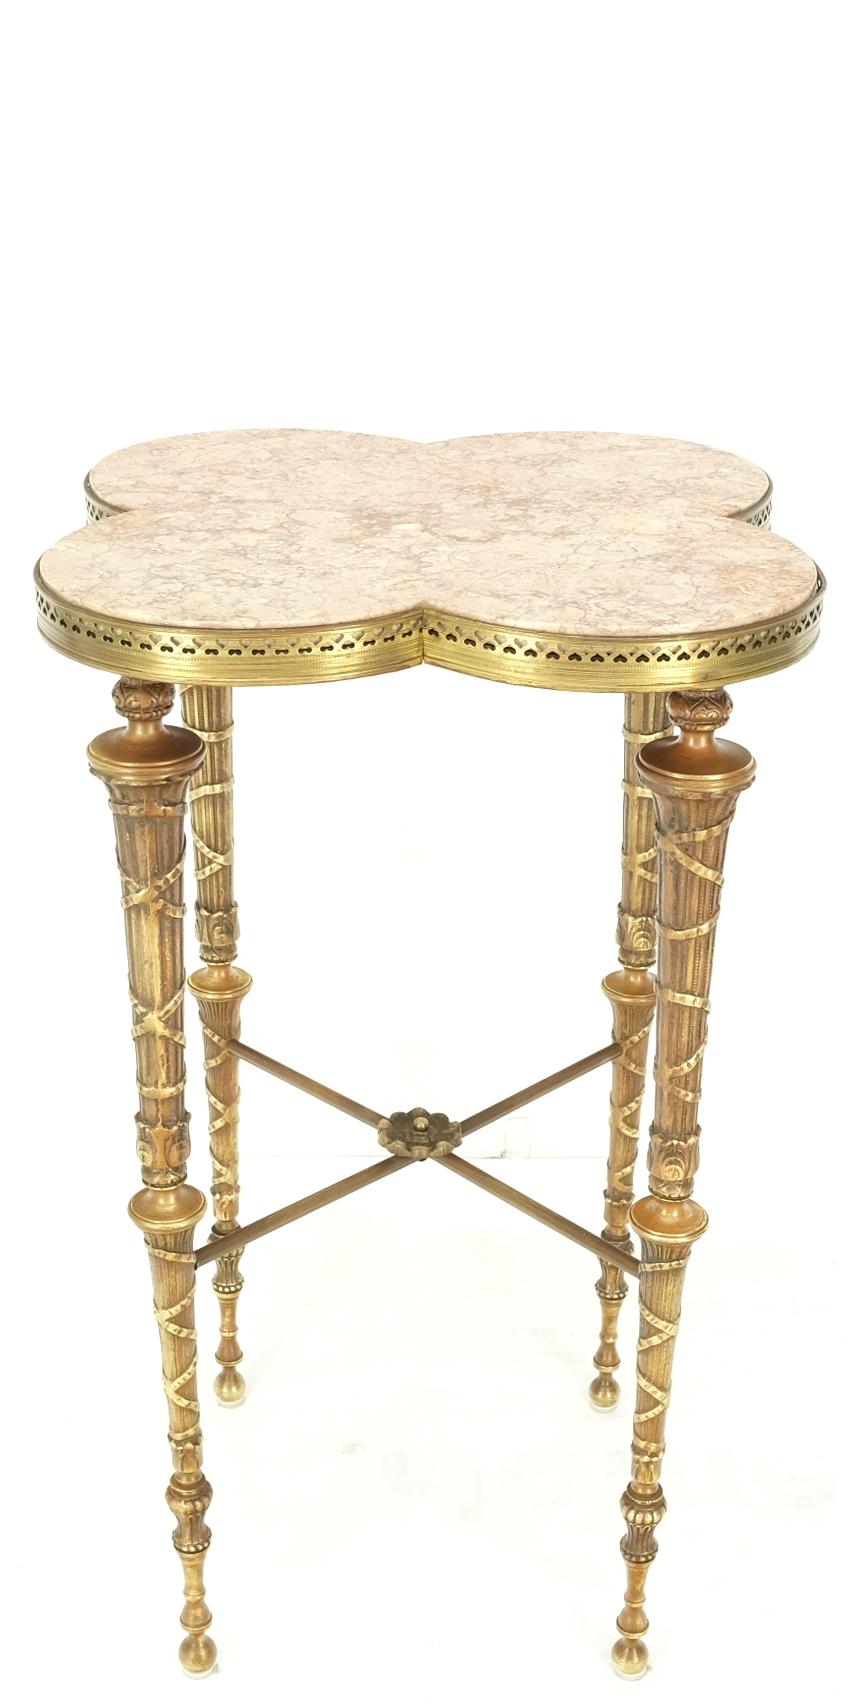 Exception Clover Shape Pink Marble Top Fluted Brass Legs Tall Pedestal Stand For Sale 5